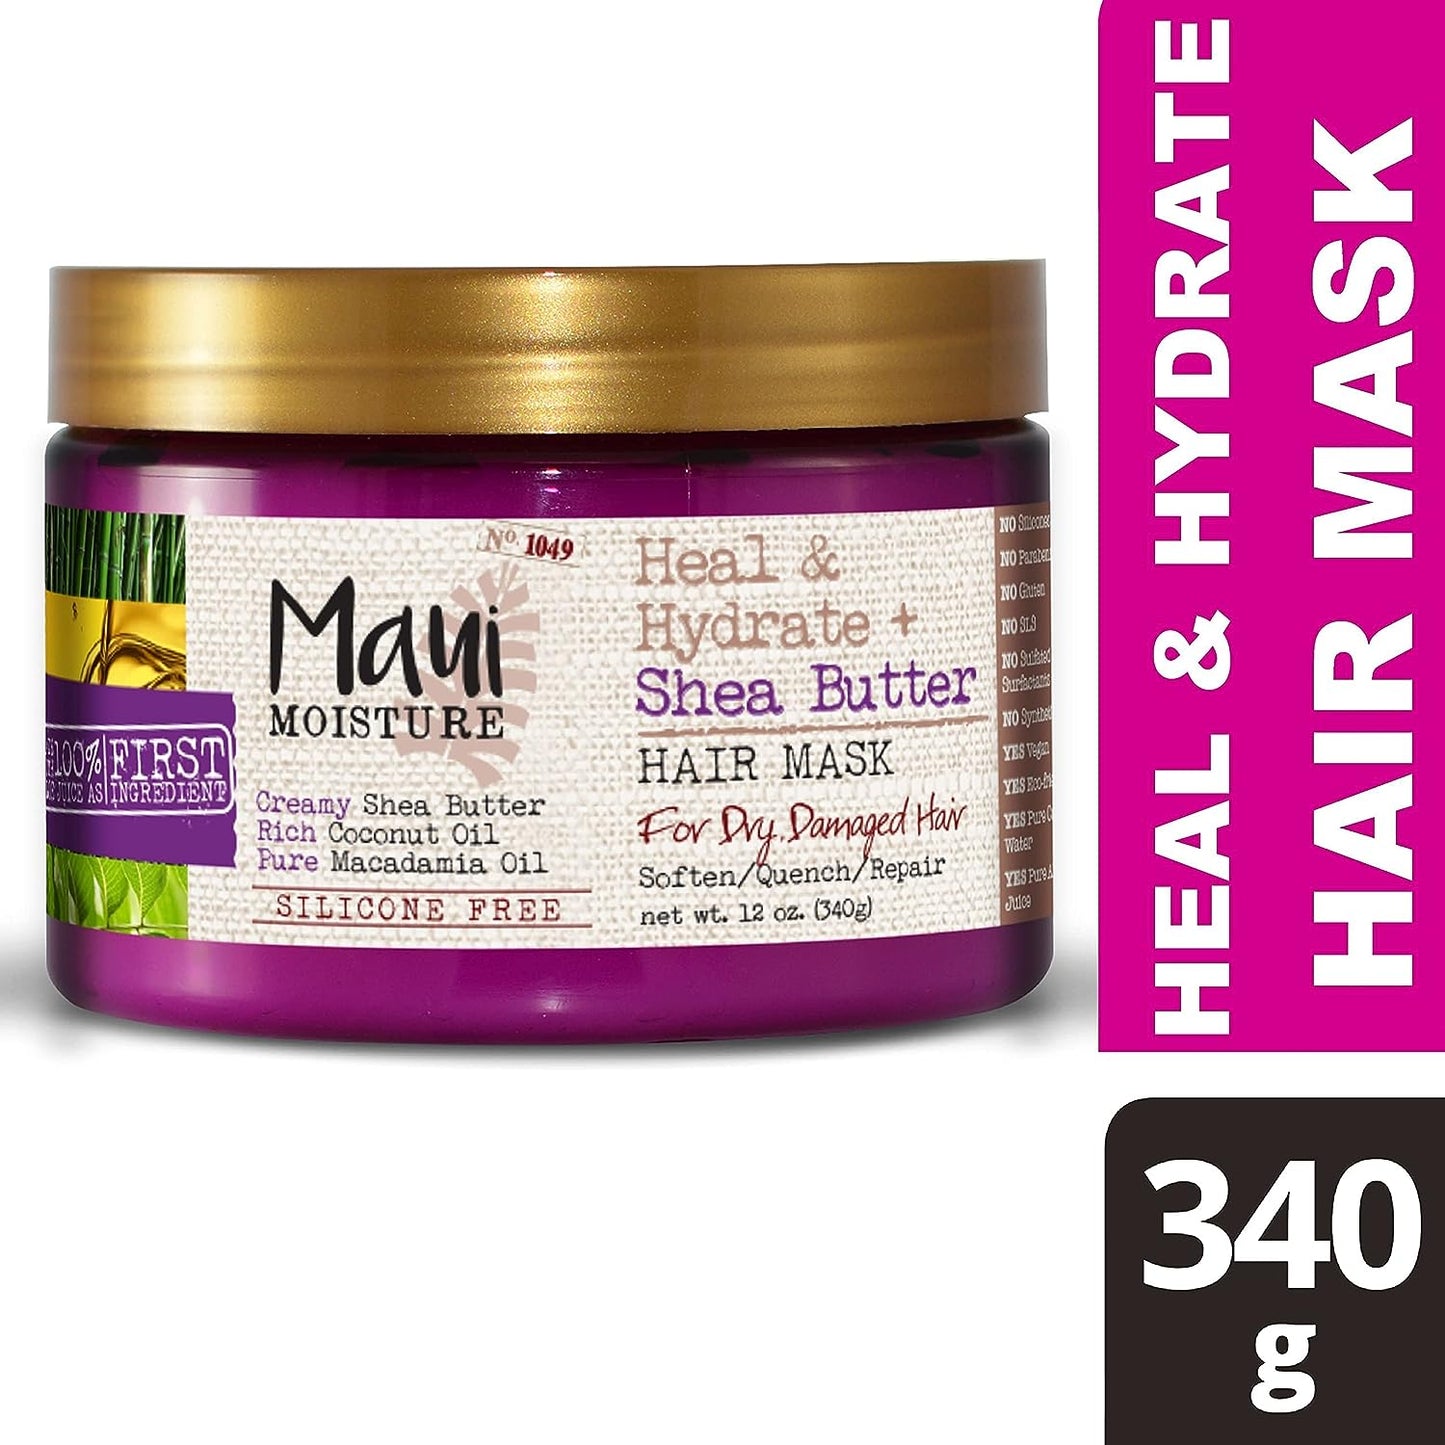 Maui Moisture Heal & Hydrate Shea Butter Hair Mask & Leave-In Conditioner: Deeply Nourishing Treatment for Curls, Split Ends Repair - Vegan, Silicone, Paraben & Sulfate-Free - 12 oz